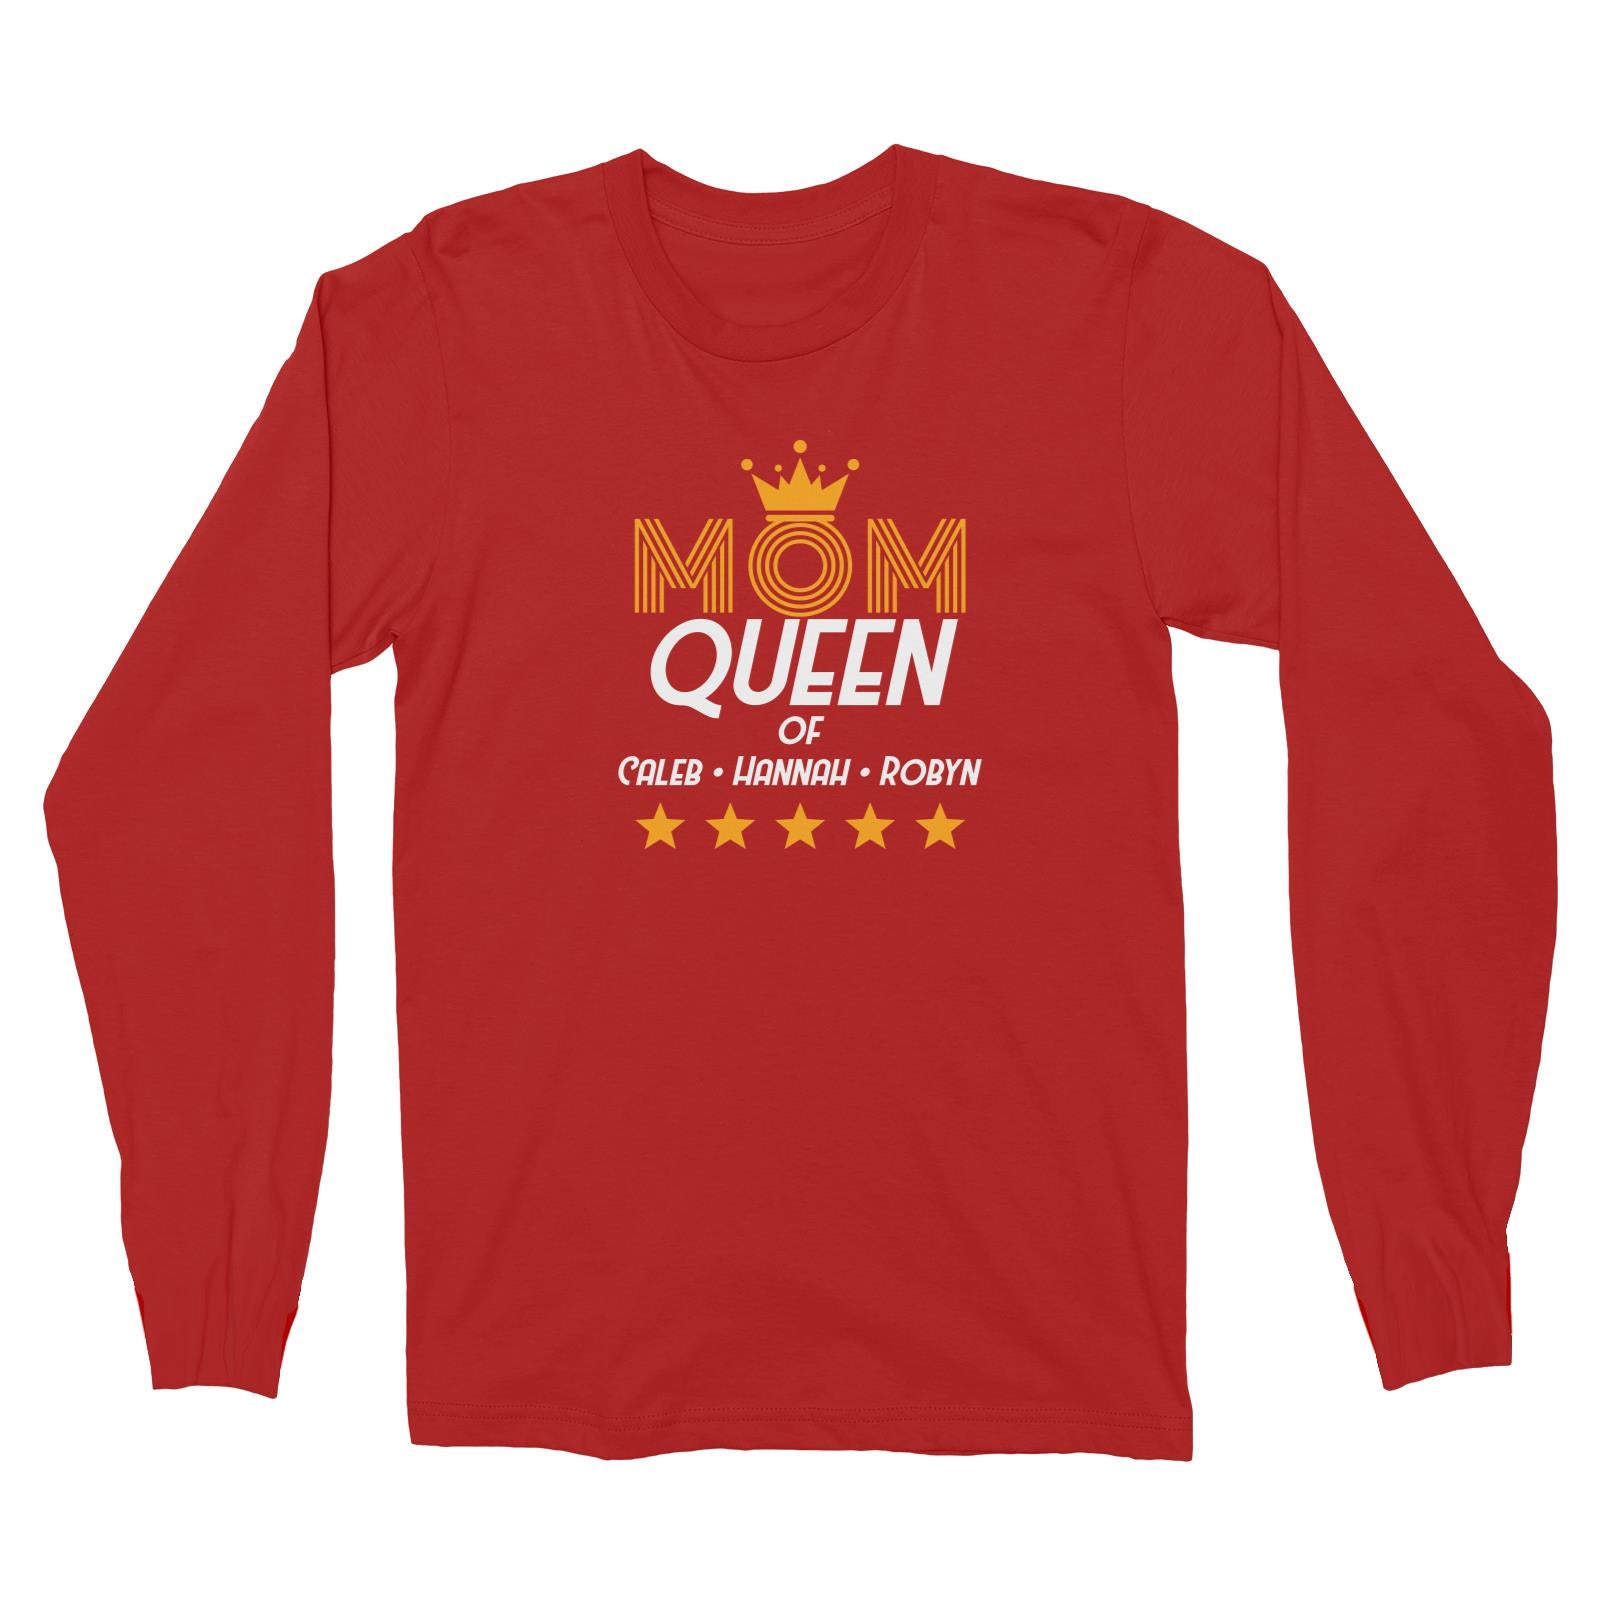 Mom with Tiara Queen of Personalizable with Text Long Sleeve Unisex T-Shirt